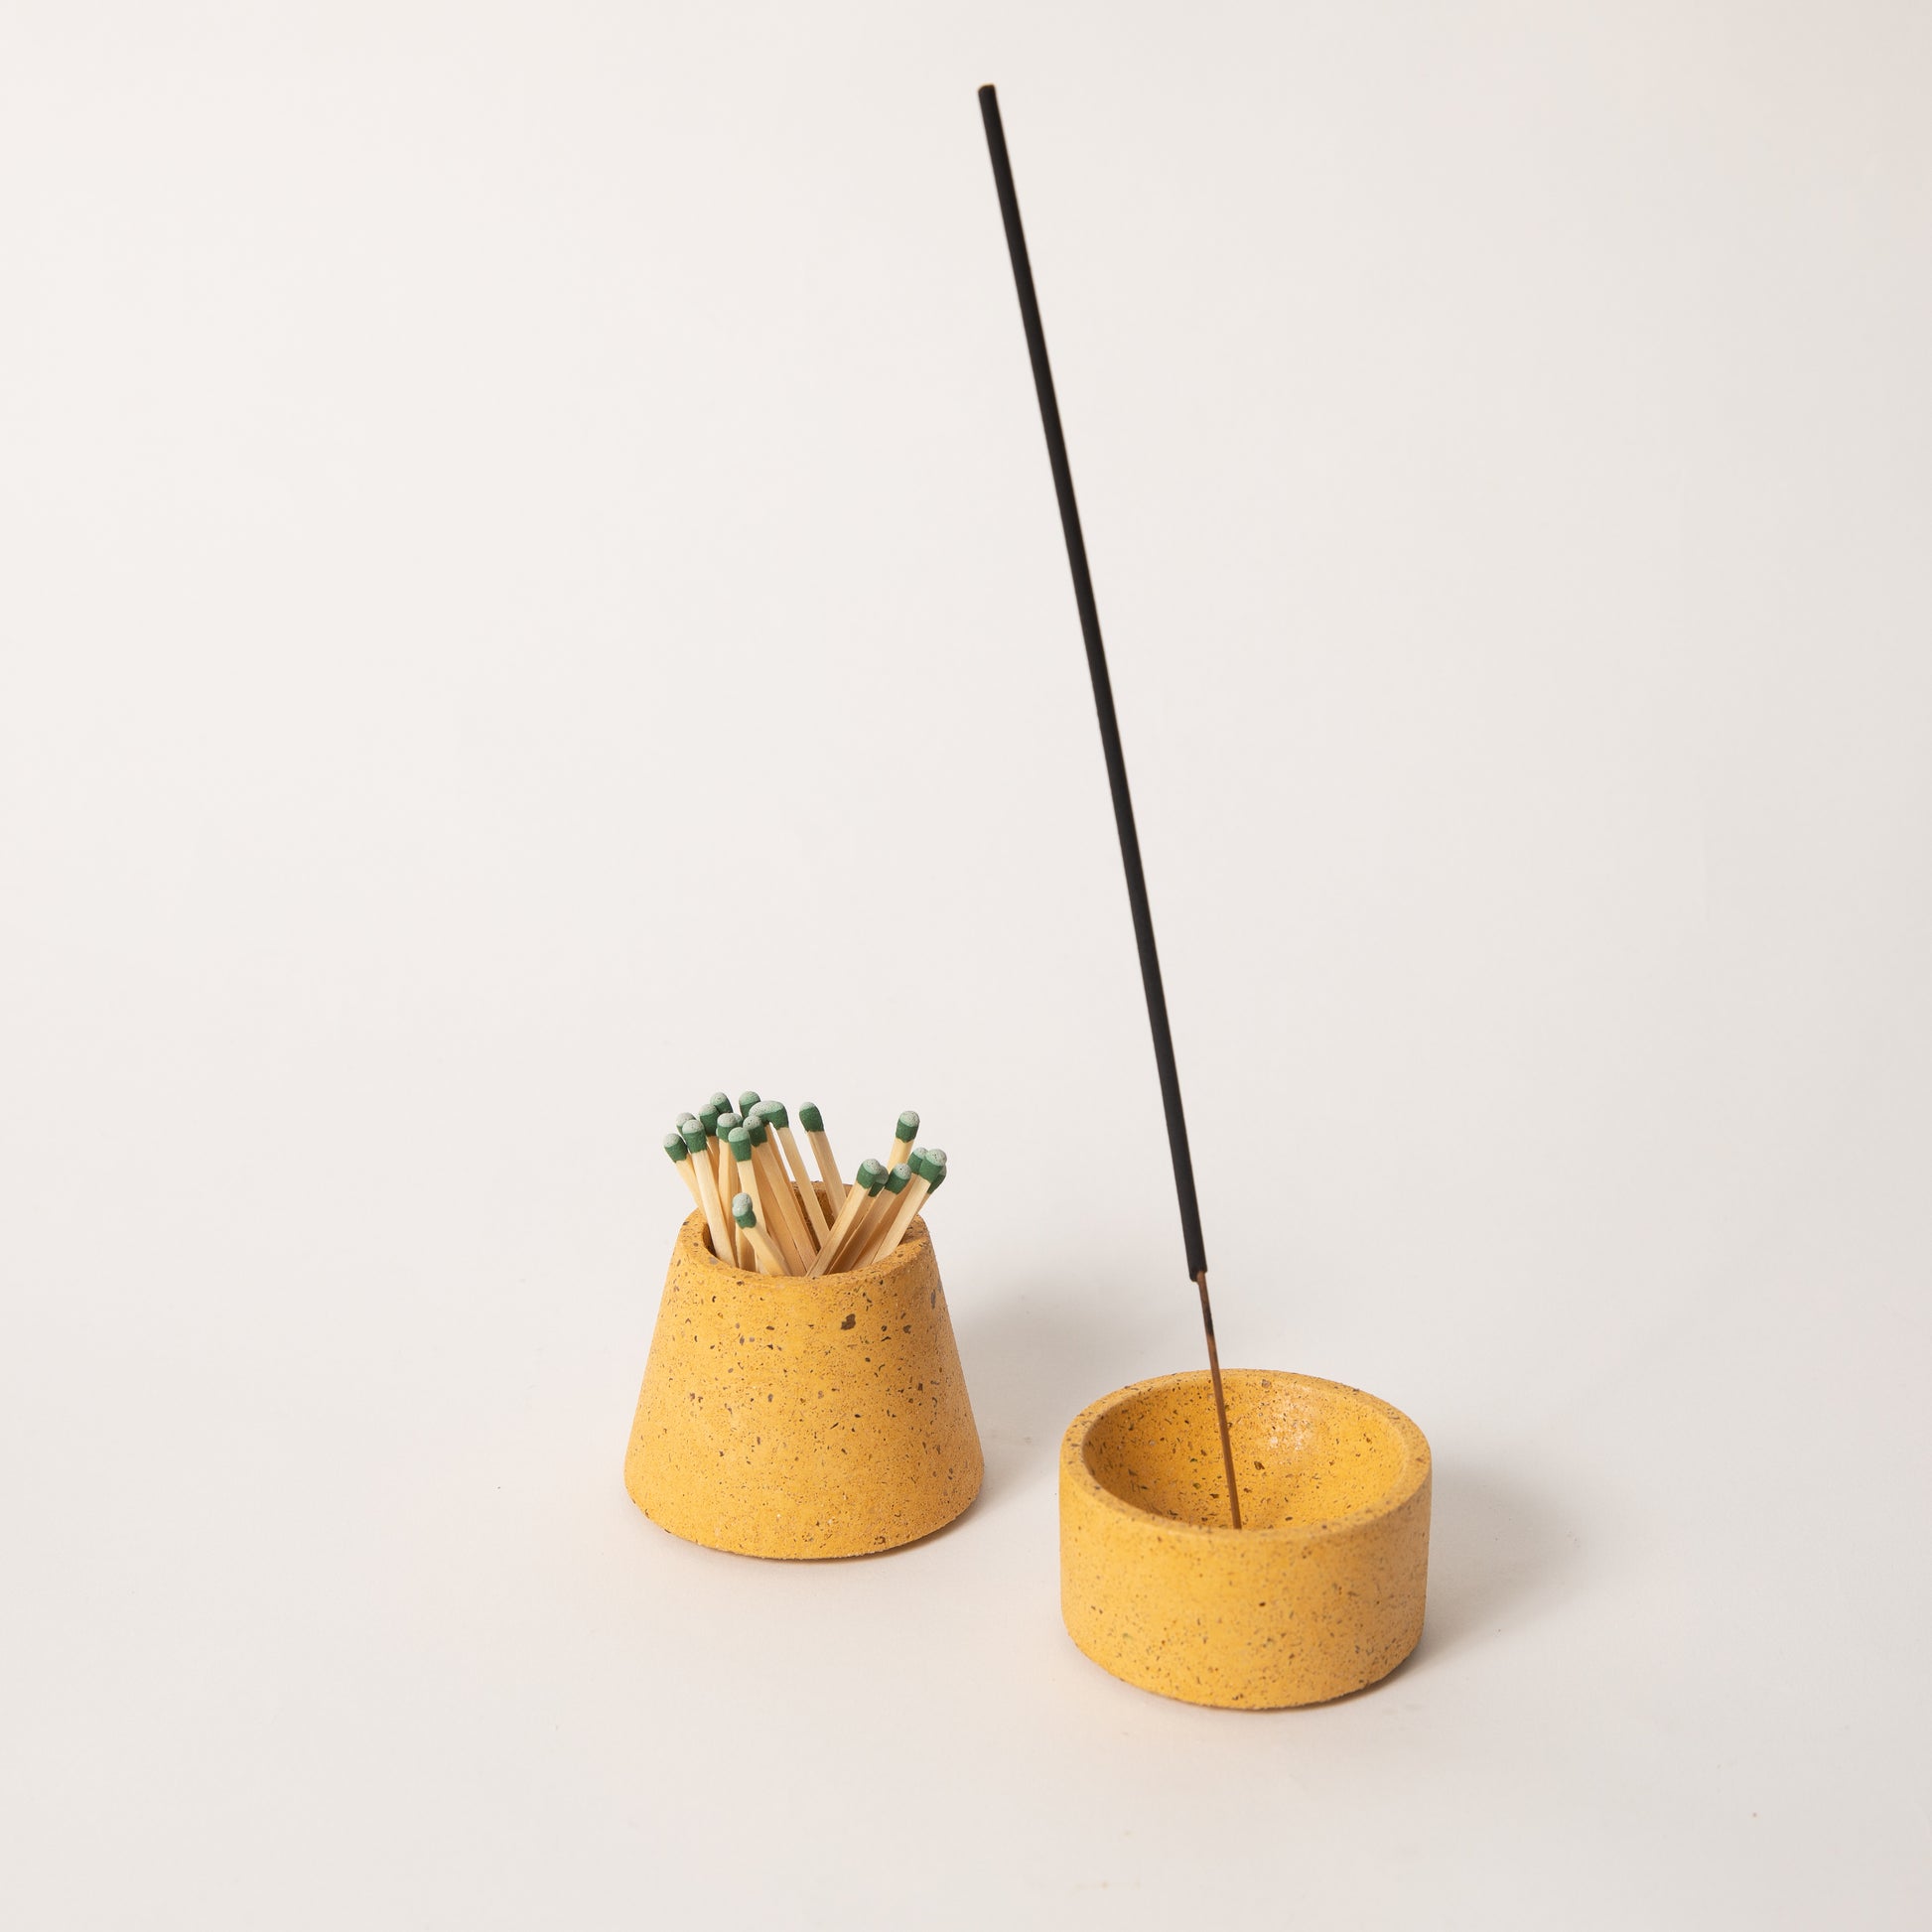 Marigold terrazzo matchstick & incense holder set, styled with strike-anywhere matches & an incense stick.